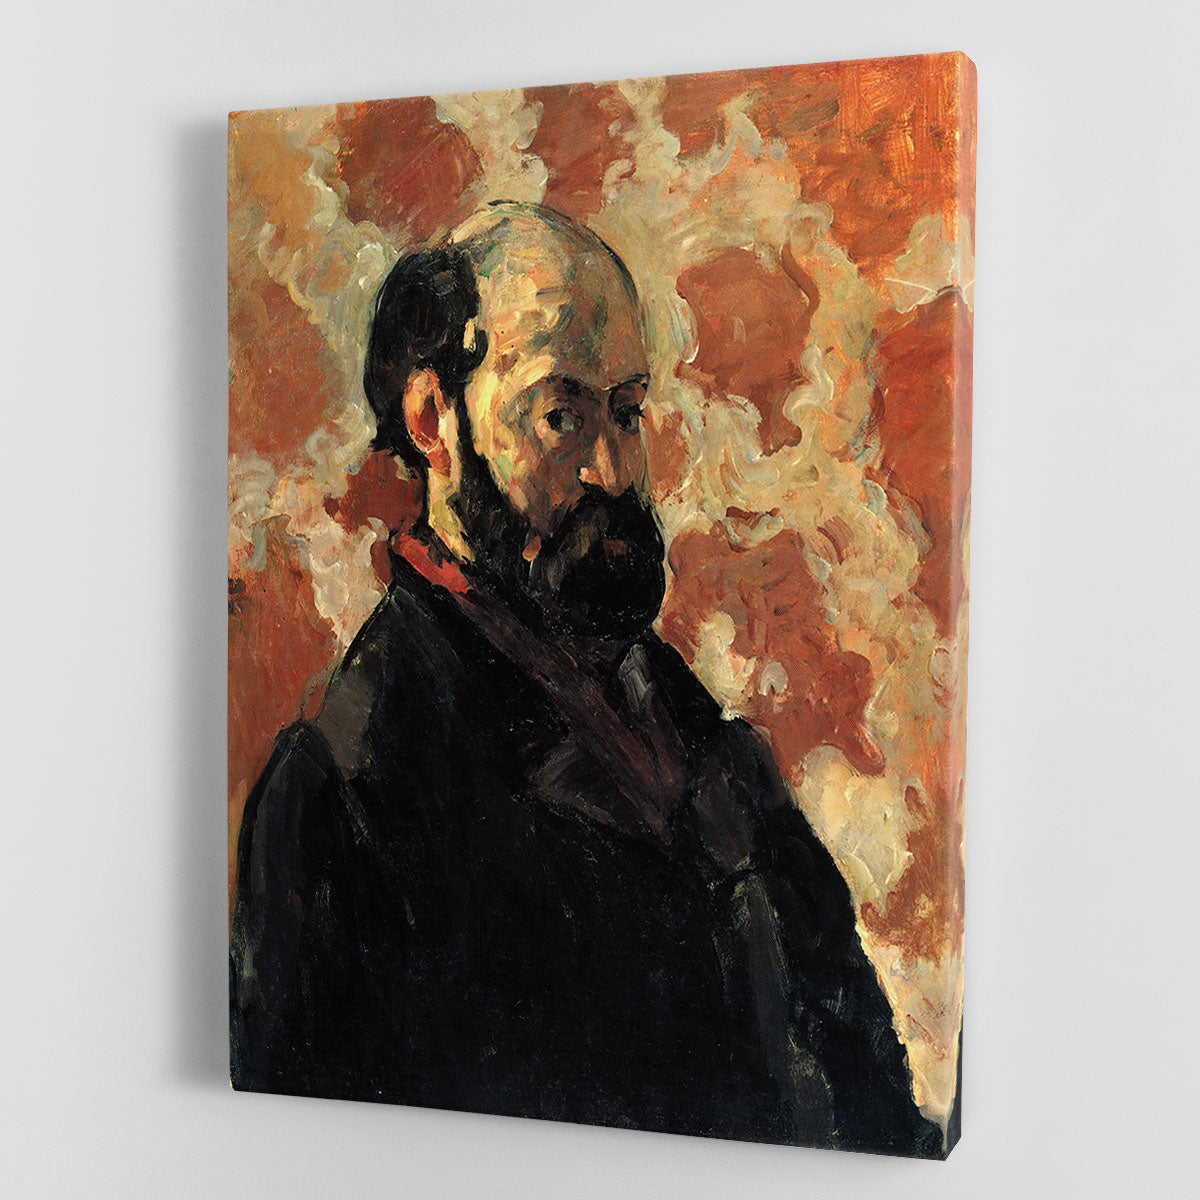 Self-portrait before Rose Background by Cezanne Canvas Print or Poster - Canvas Art Rocks - 1